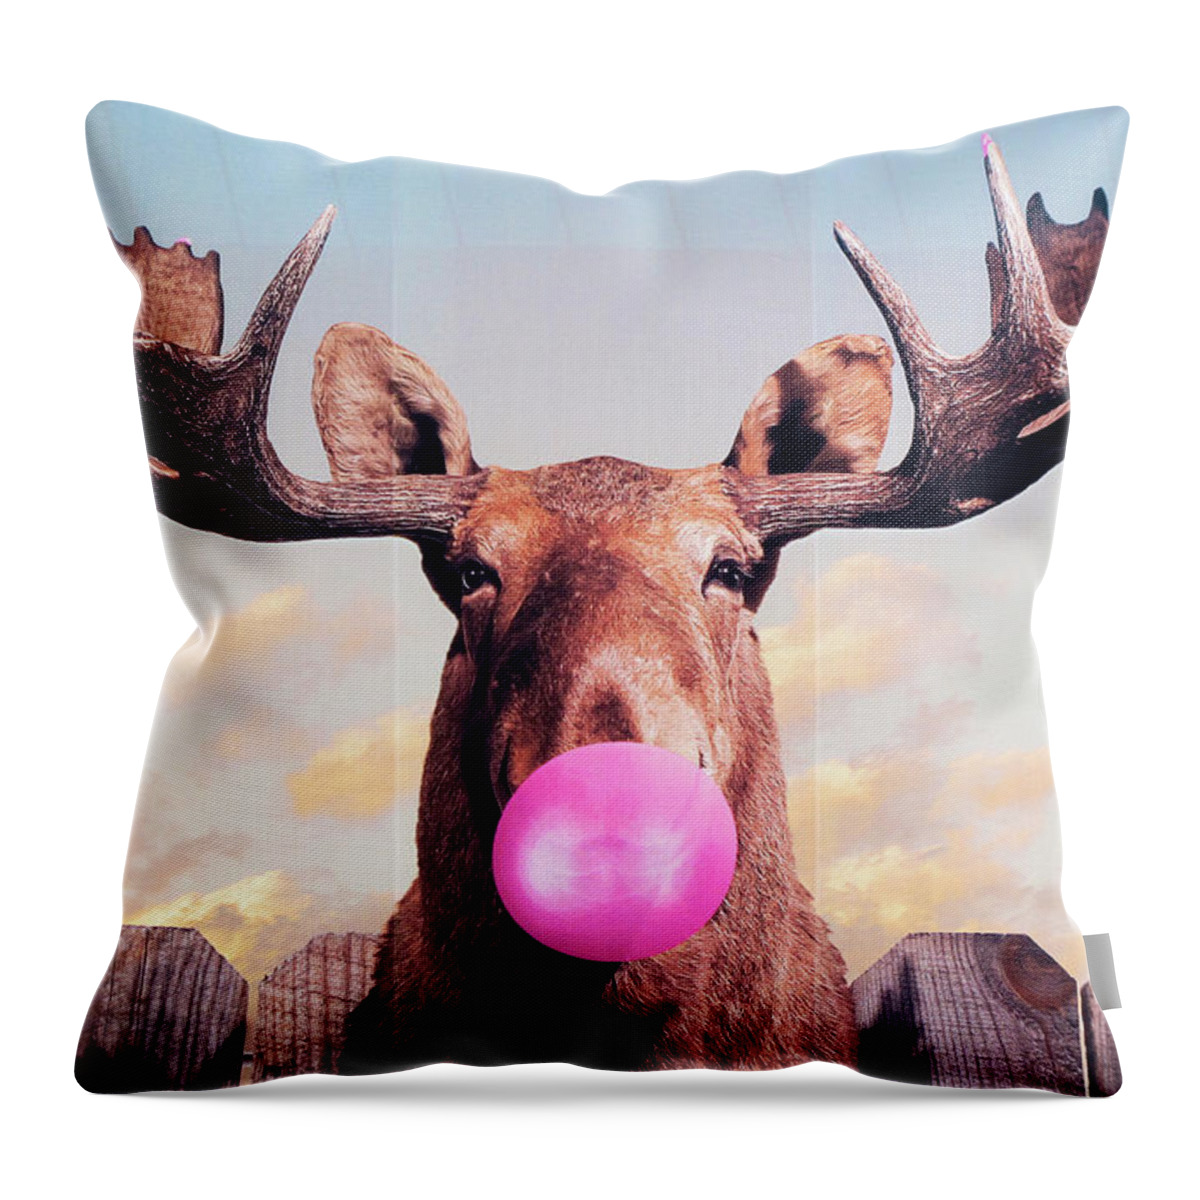 Funky Moose Throw Pillow featuring the photograph Funky Moose by Patty Colabuono